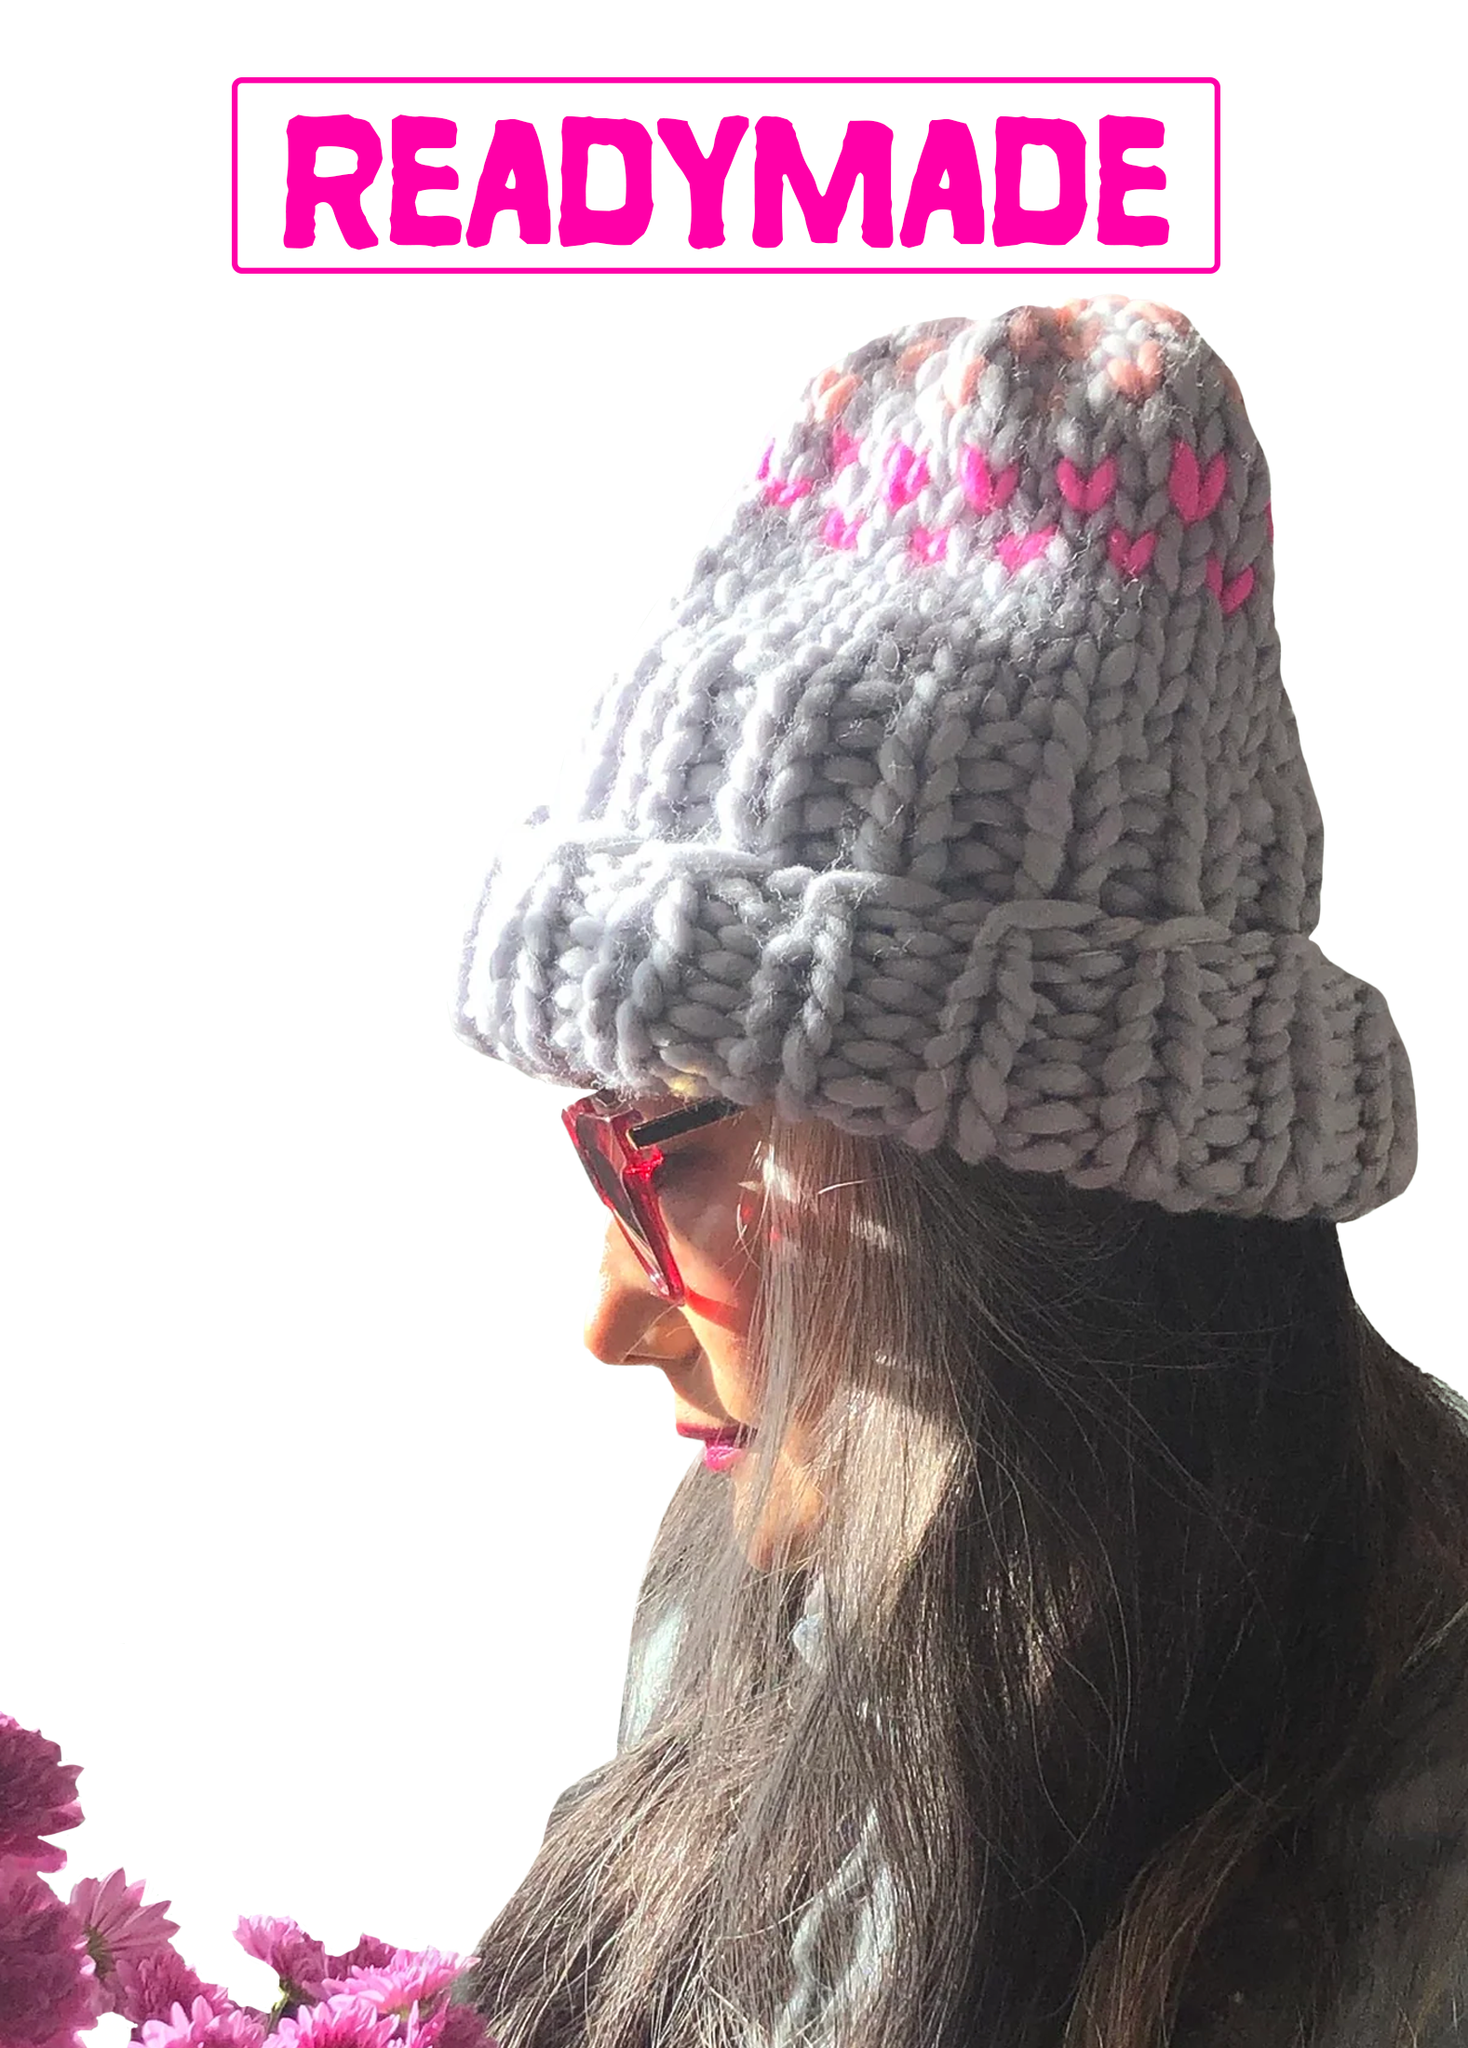 Edelweiss Hat with 3 colors - Merino